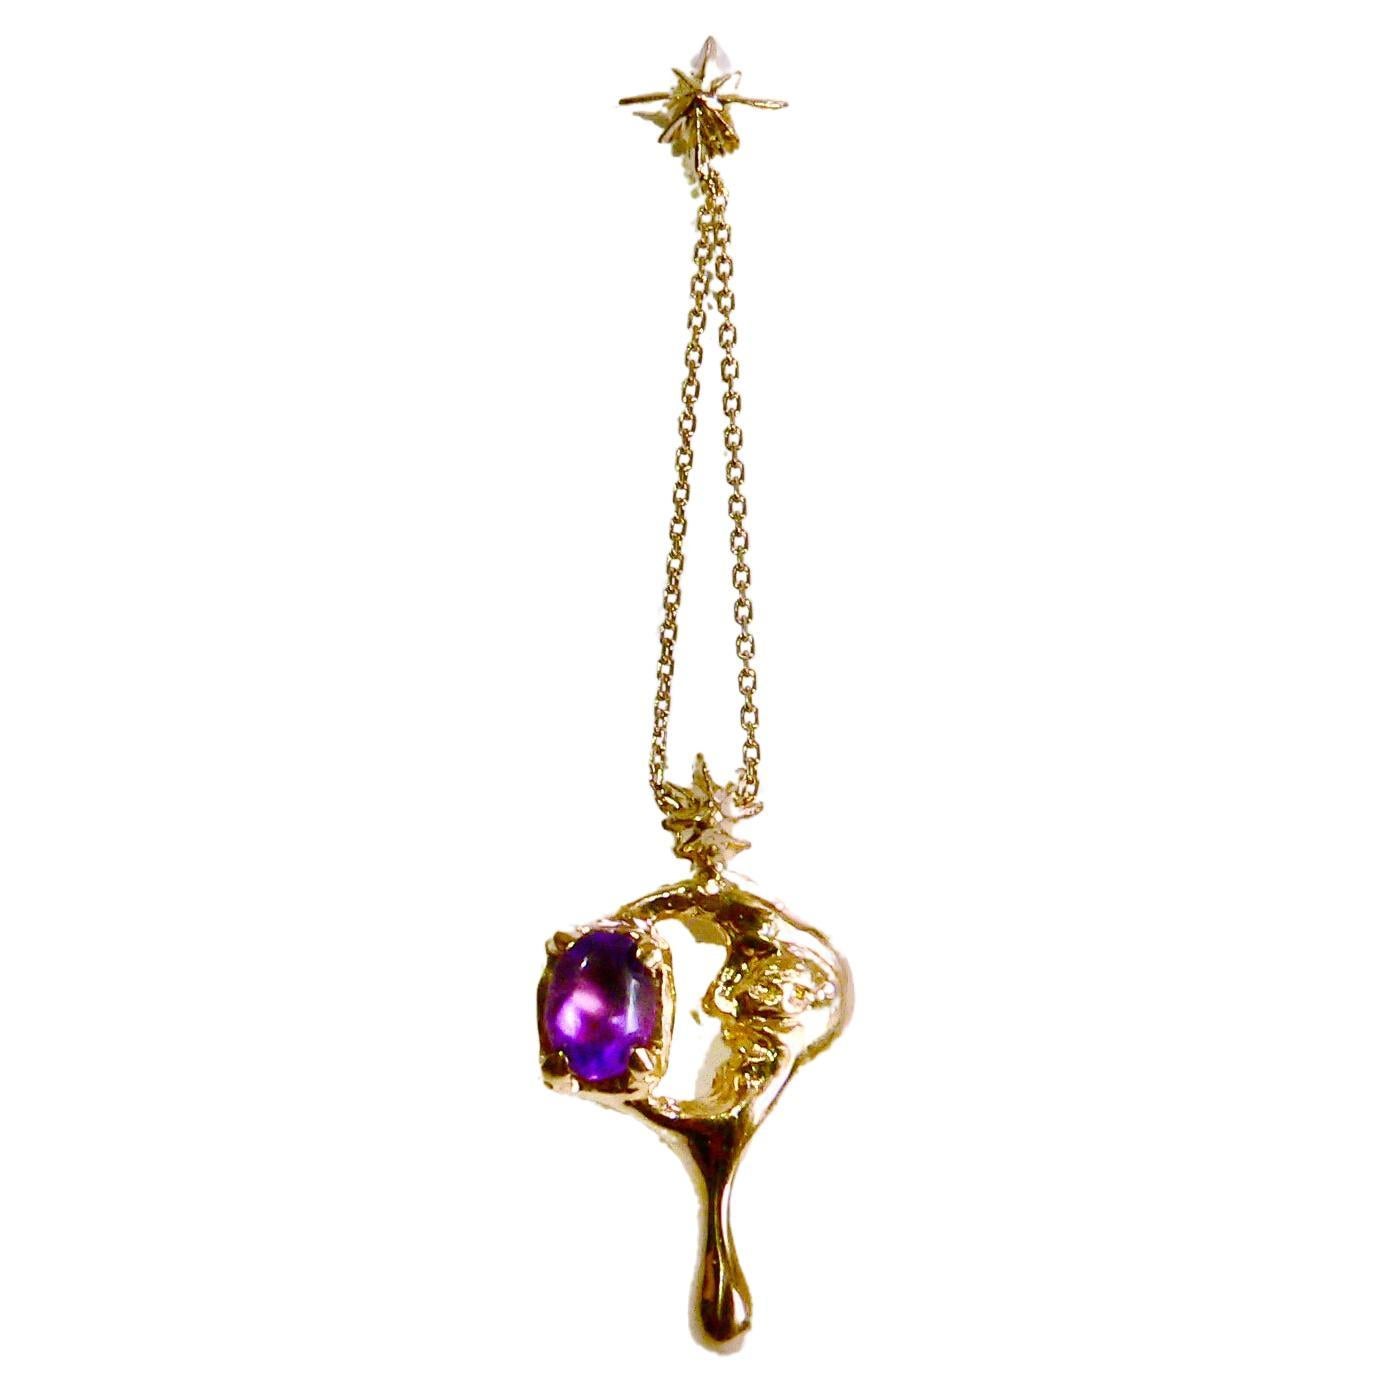 Moon drop Single Earring with Amethyst, Gold-Plated Sterling Silver